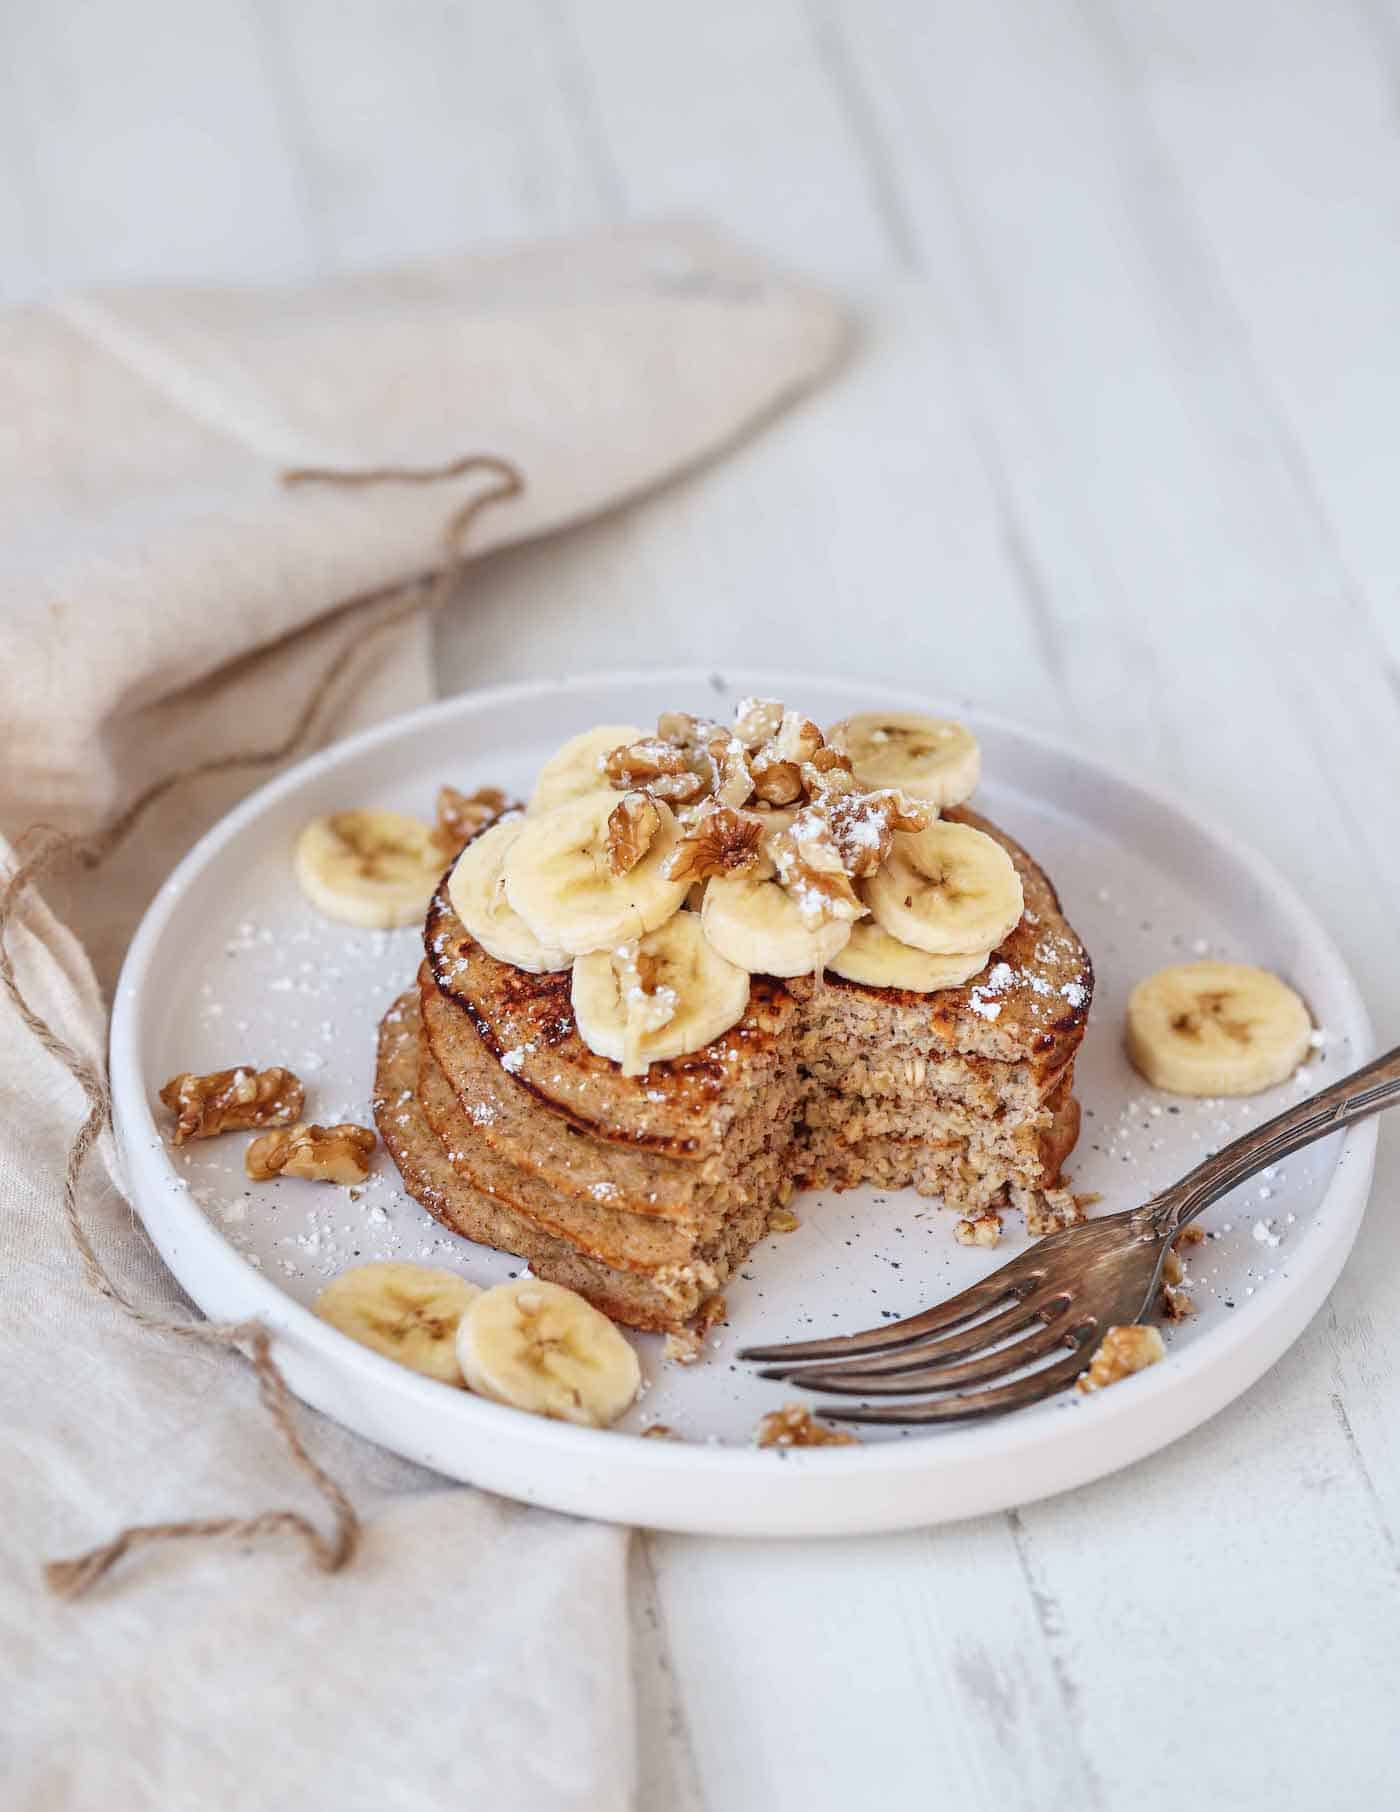 protein pancakes topped with banana slices